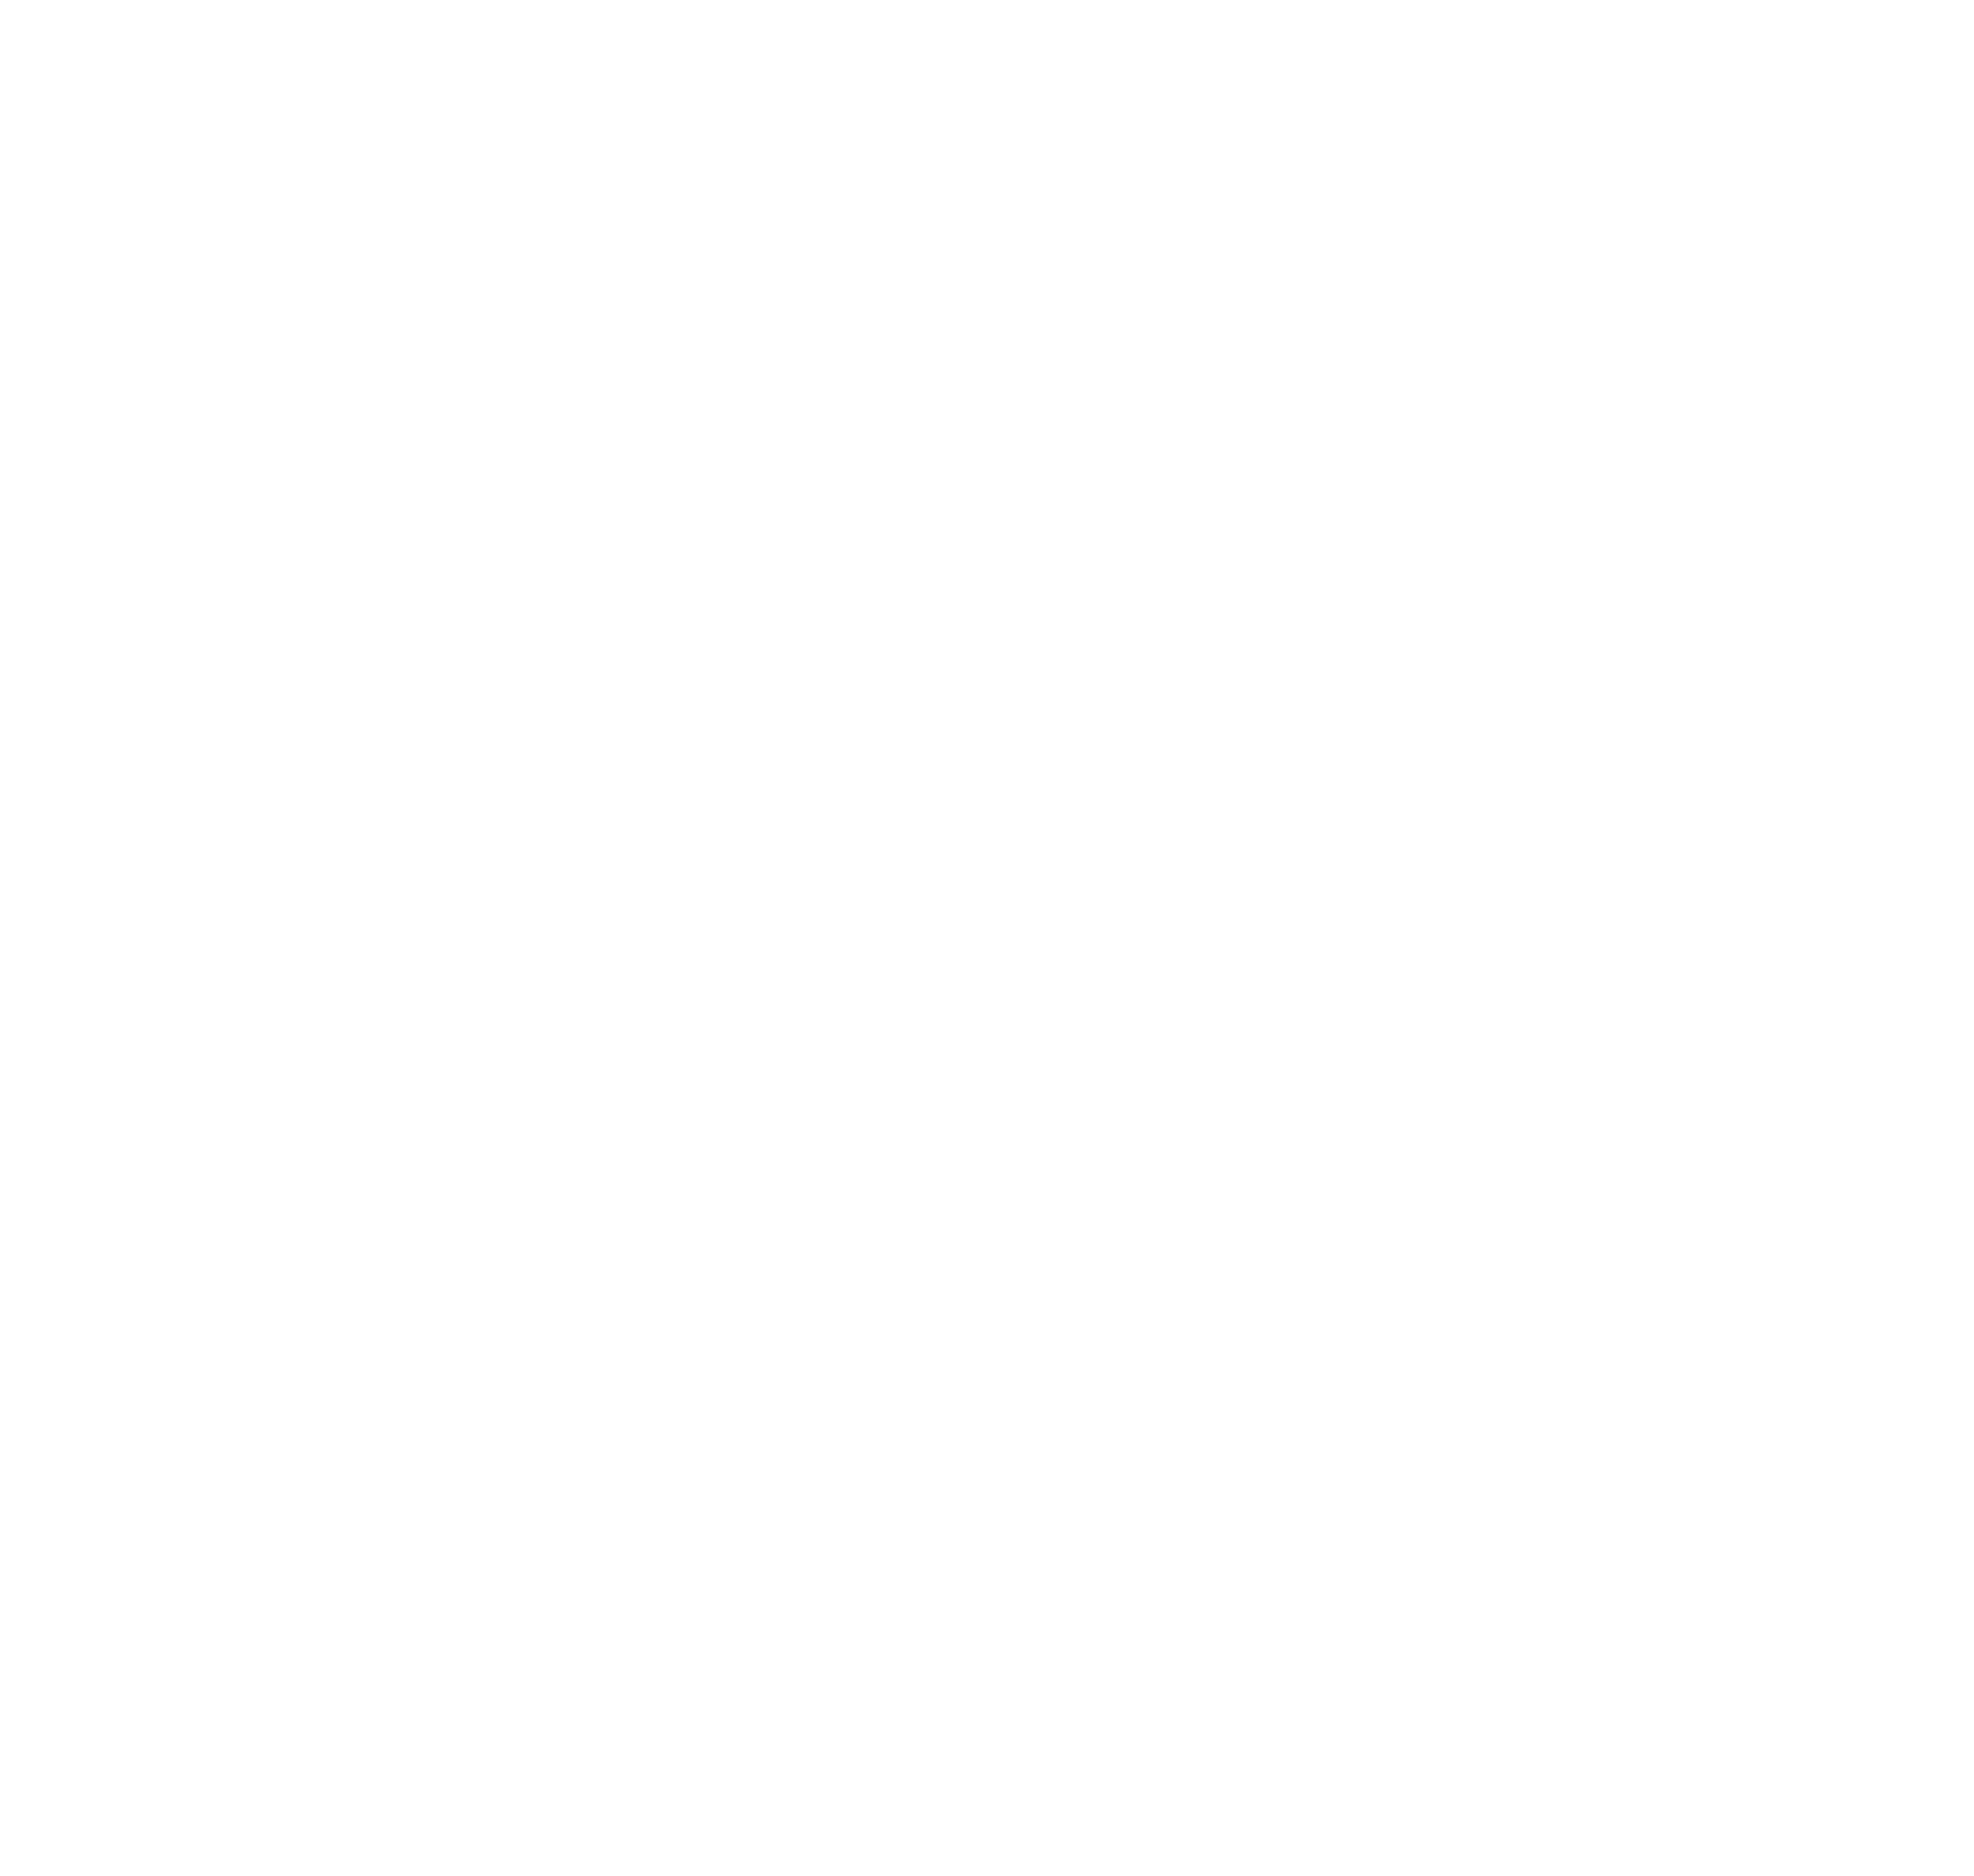 LUKOUT